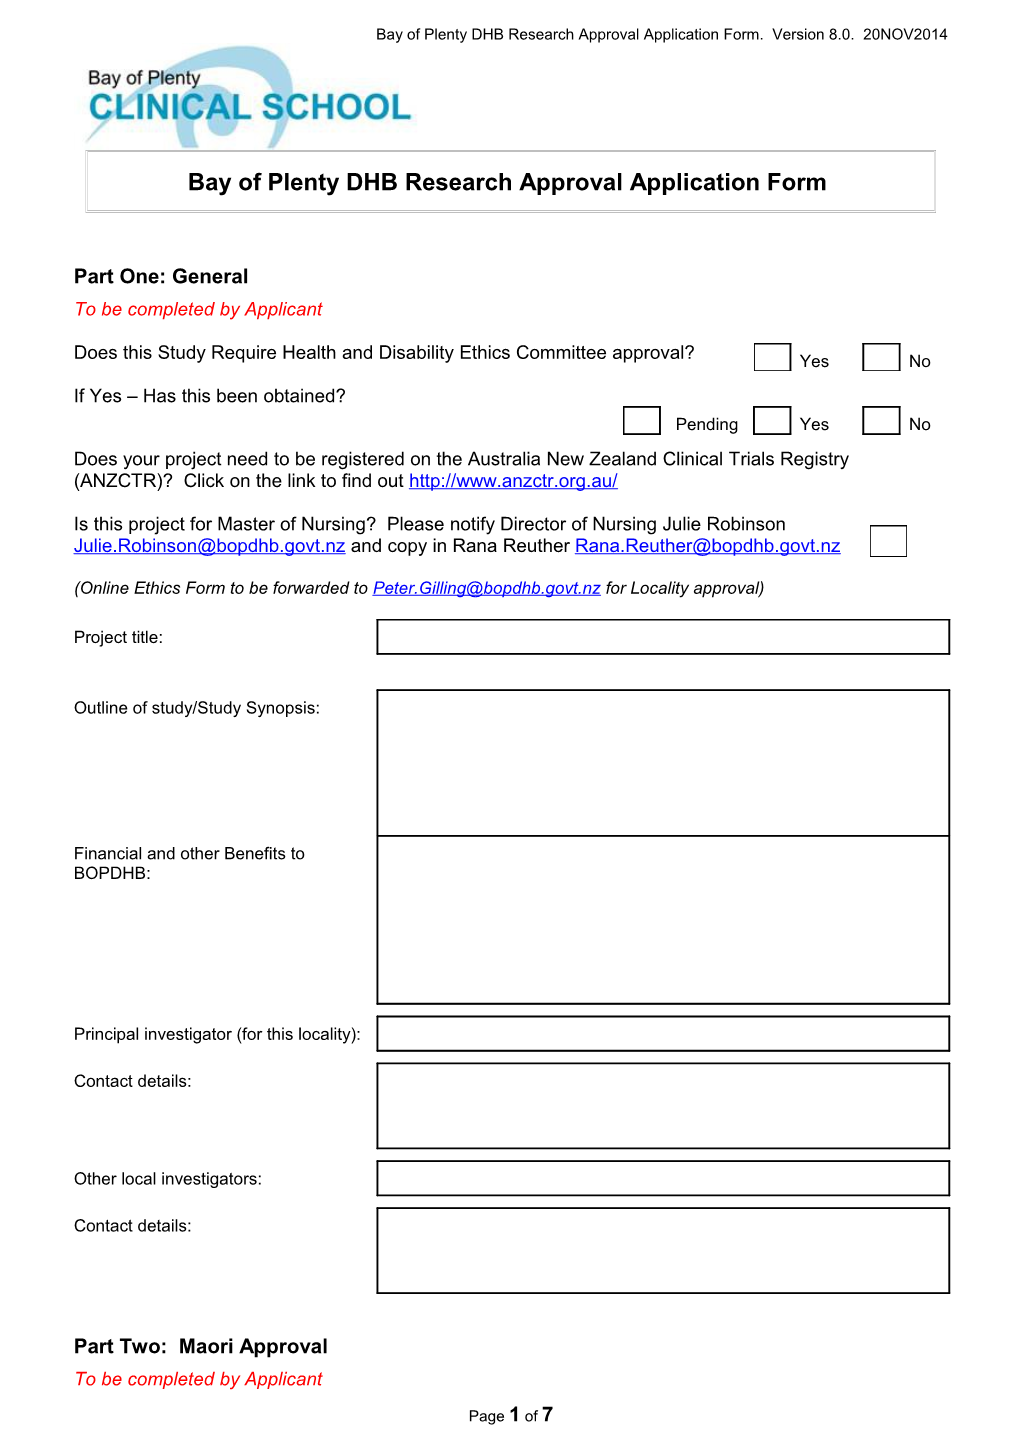 Bay of Plenty DHB Research Approval Application Form s1